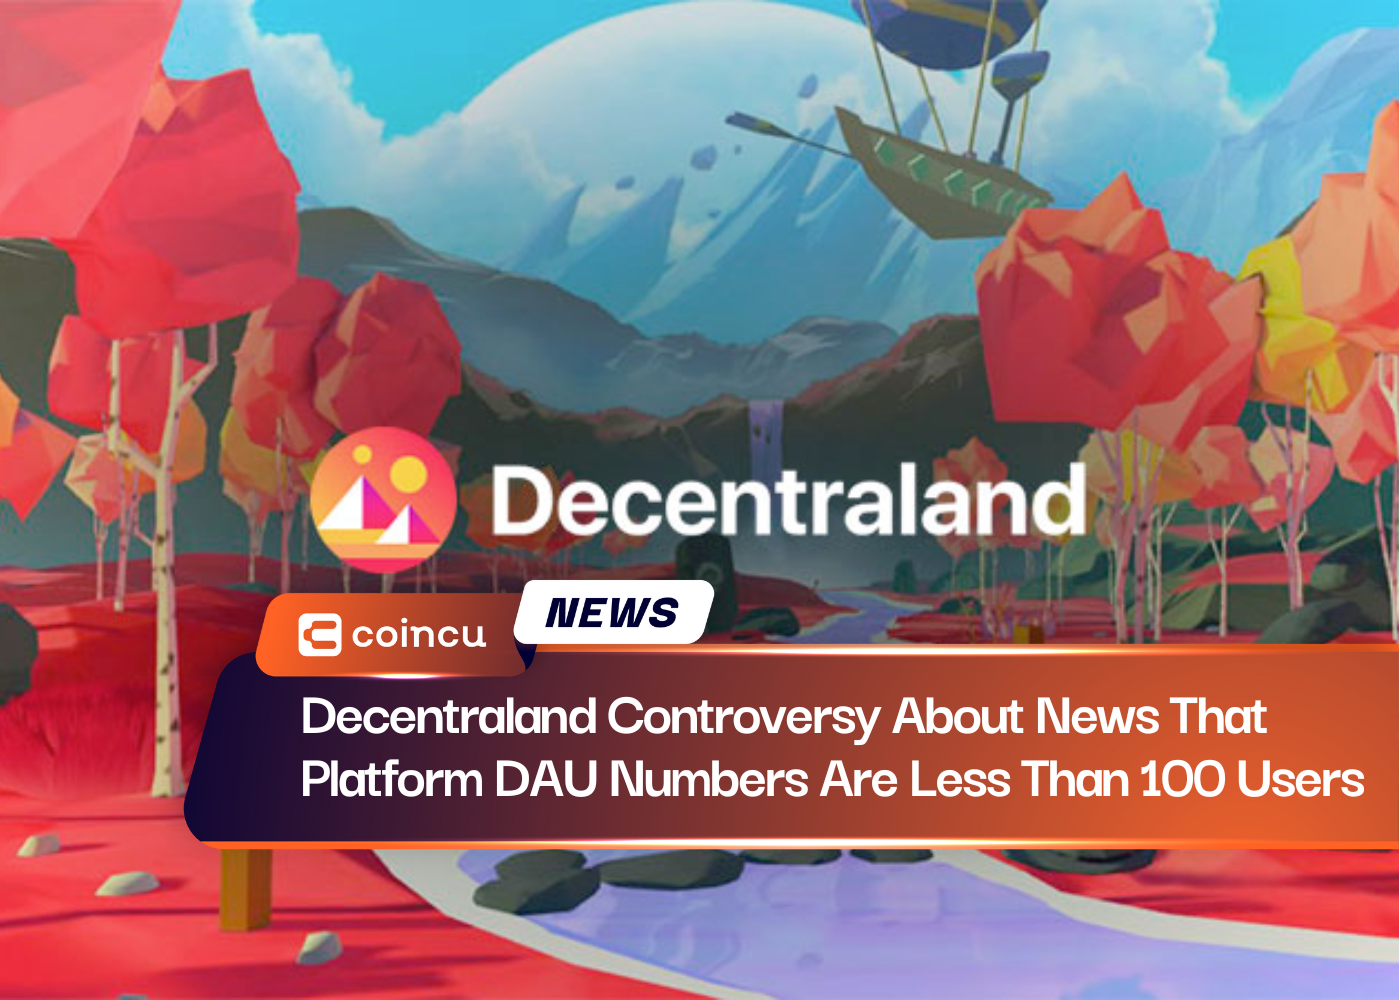 Decentraland Controversy About News That Platform DAU Numbers Are Less Than 100 Users